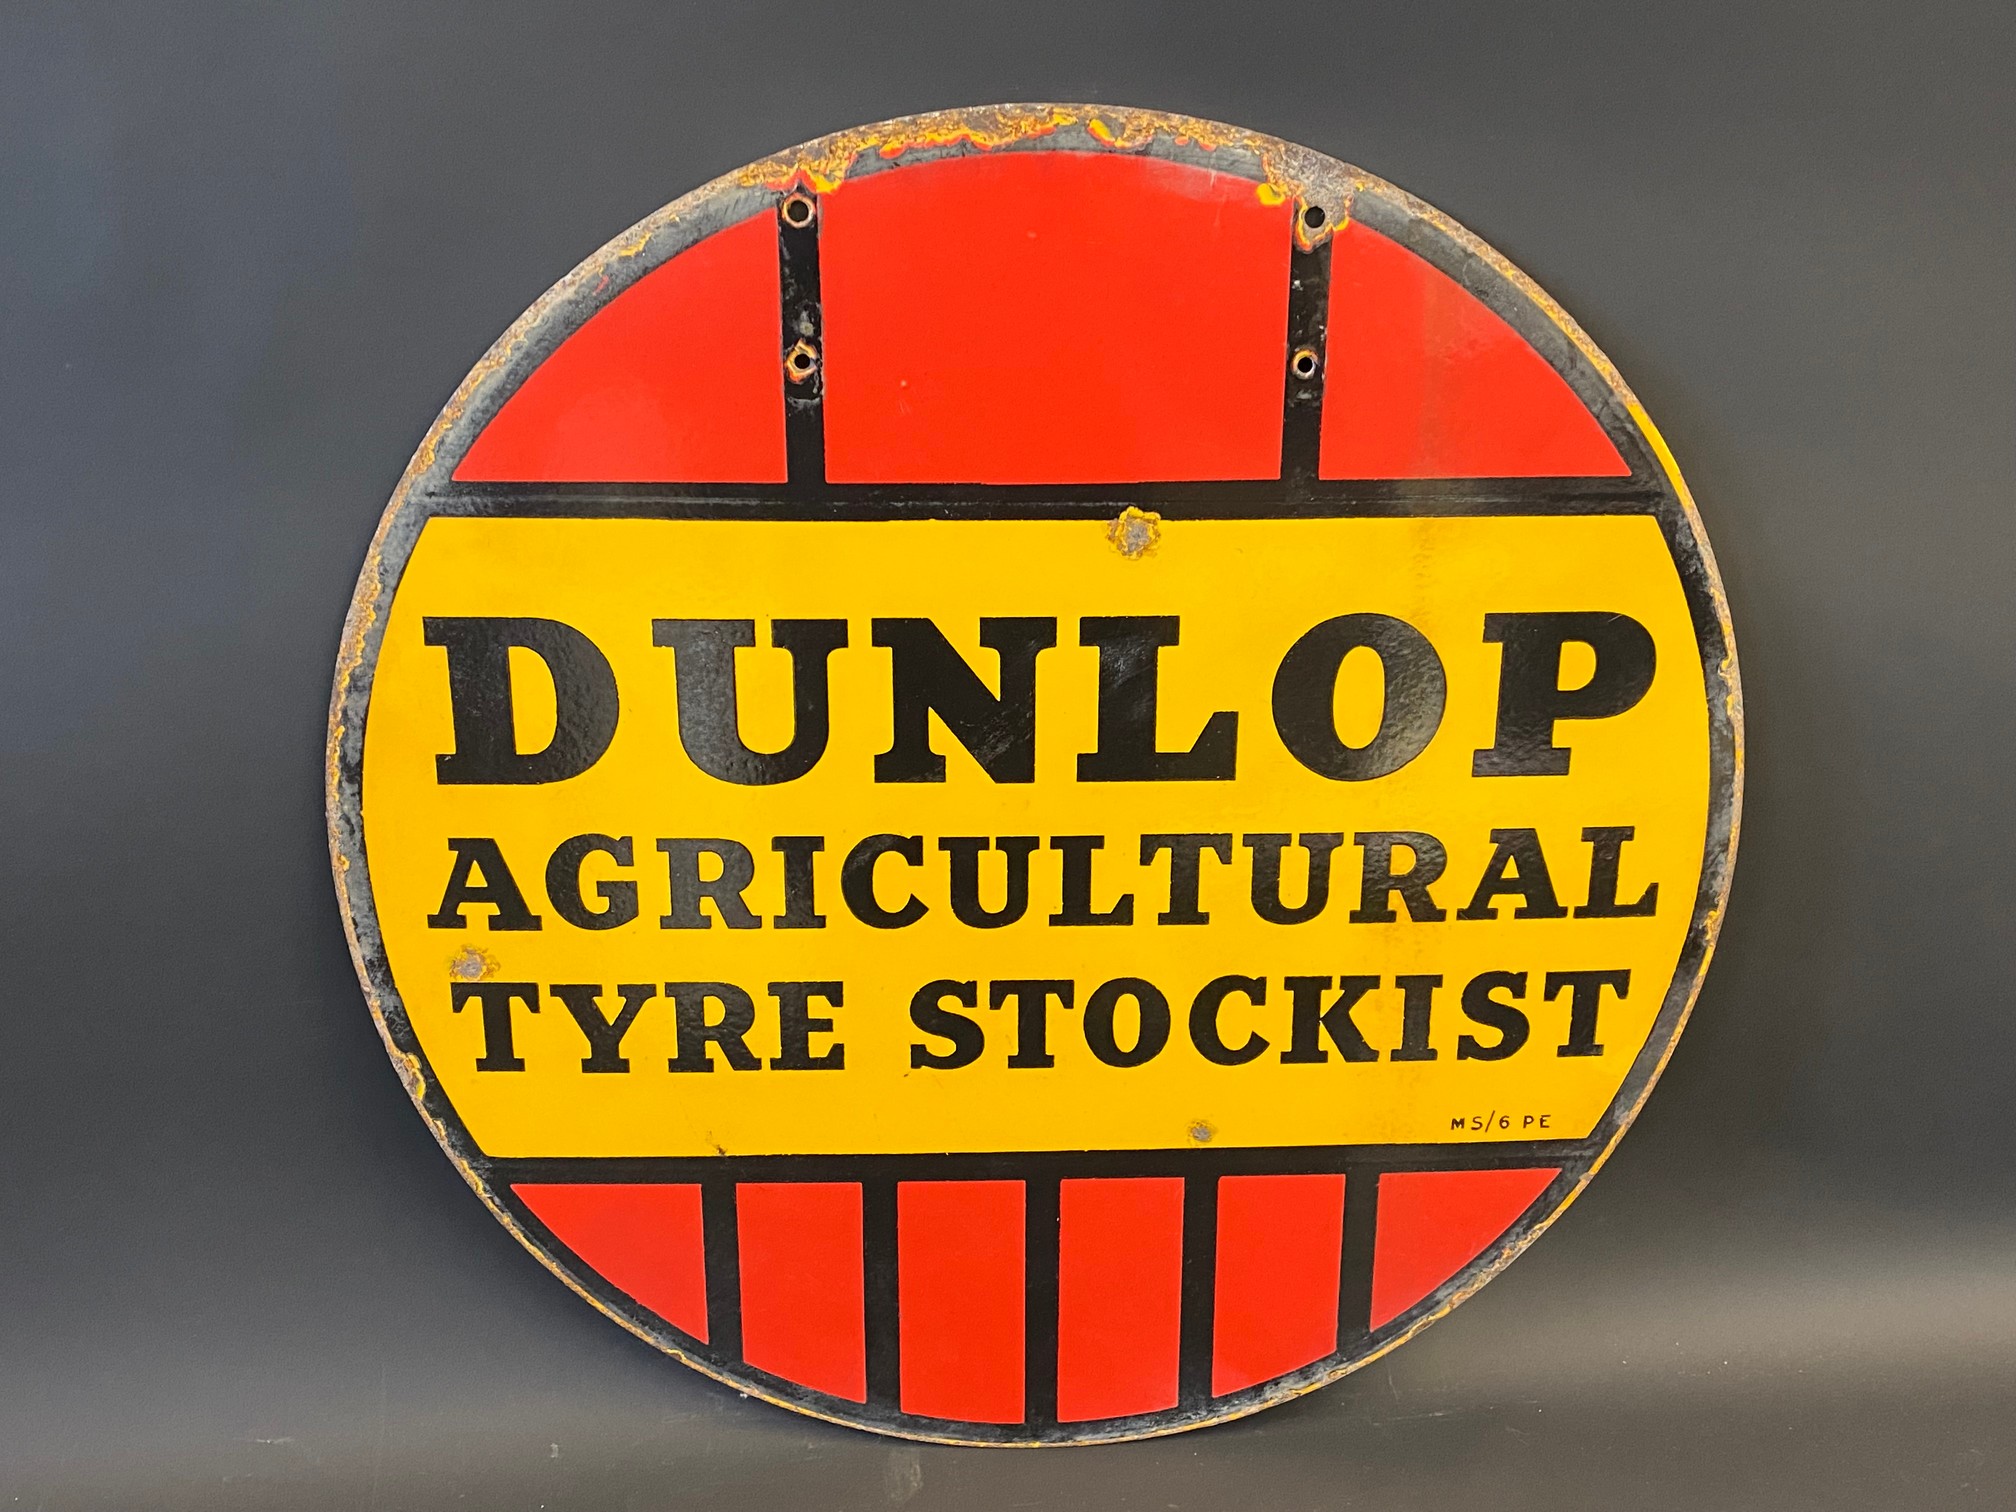 A Dunlop Agricultural Tyre Stockist circular double sided enamel sign, 24" diameter. - Image 4 of 5